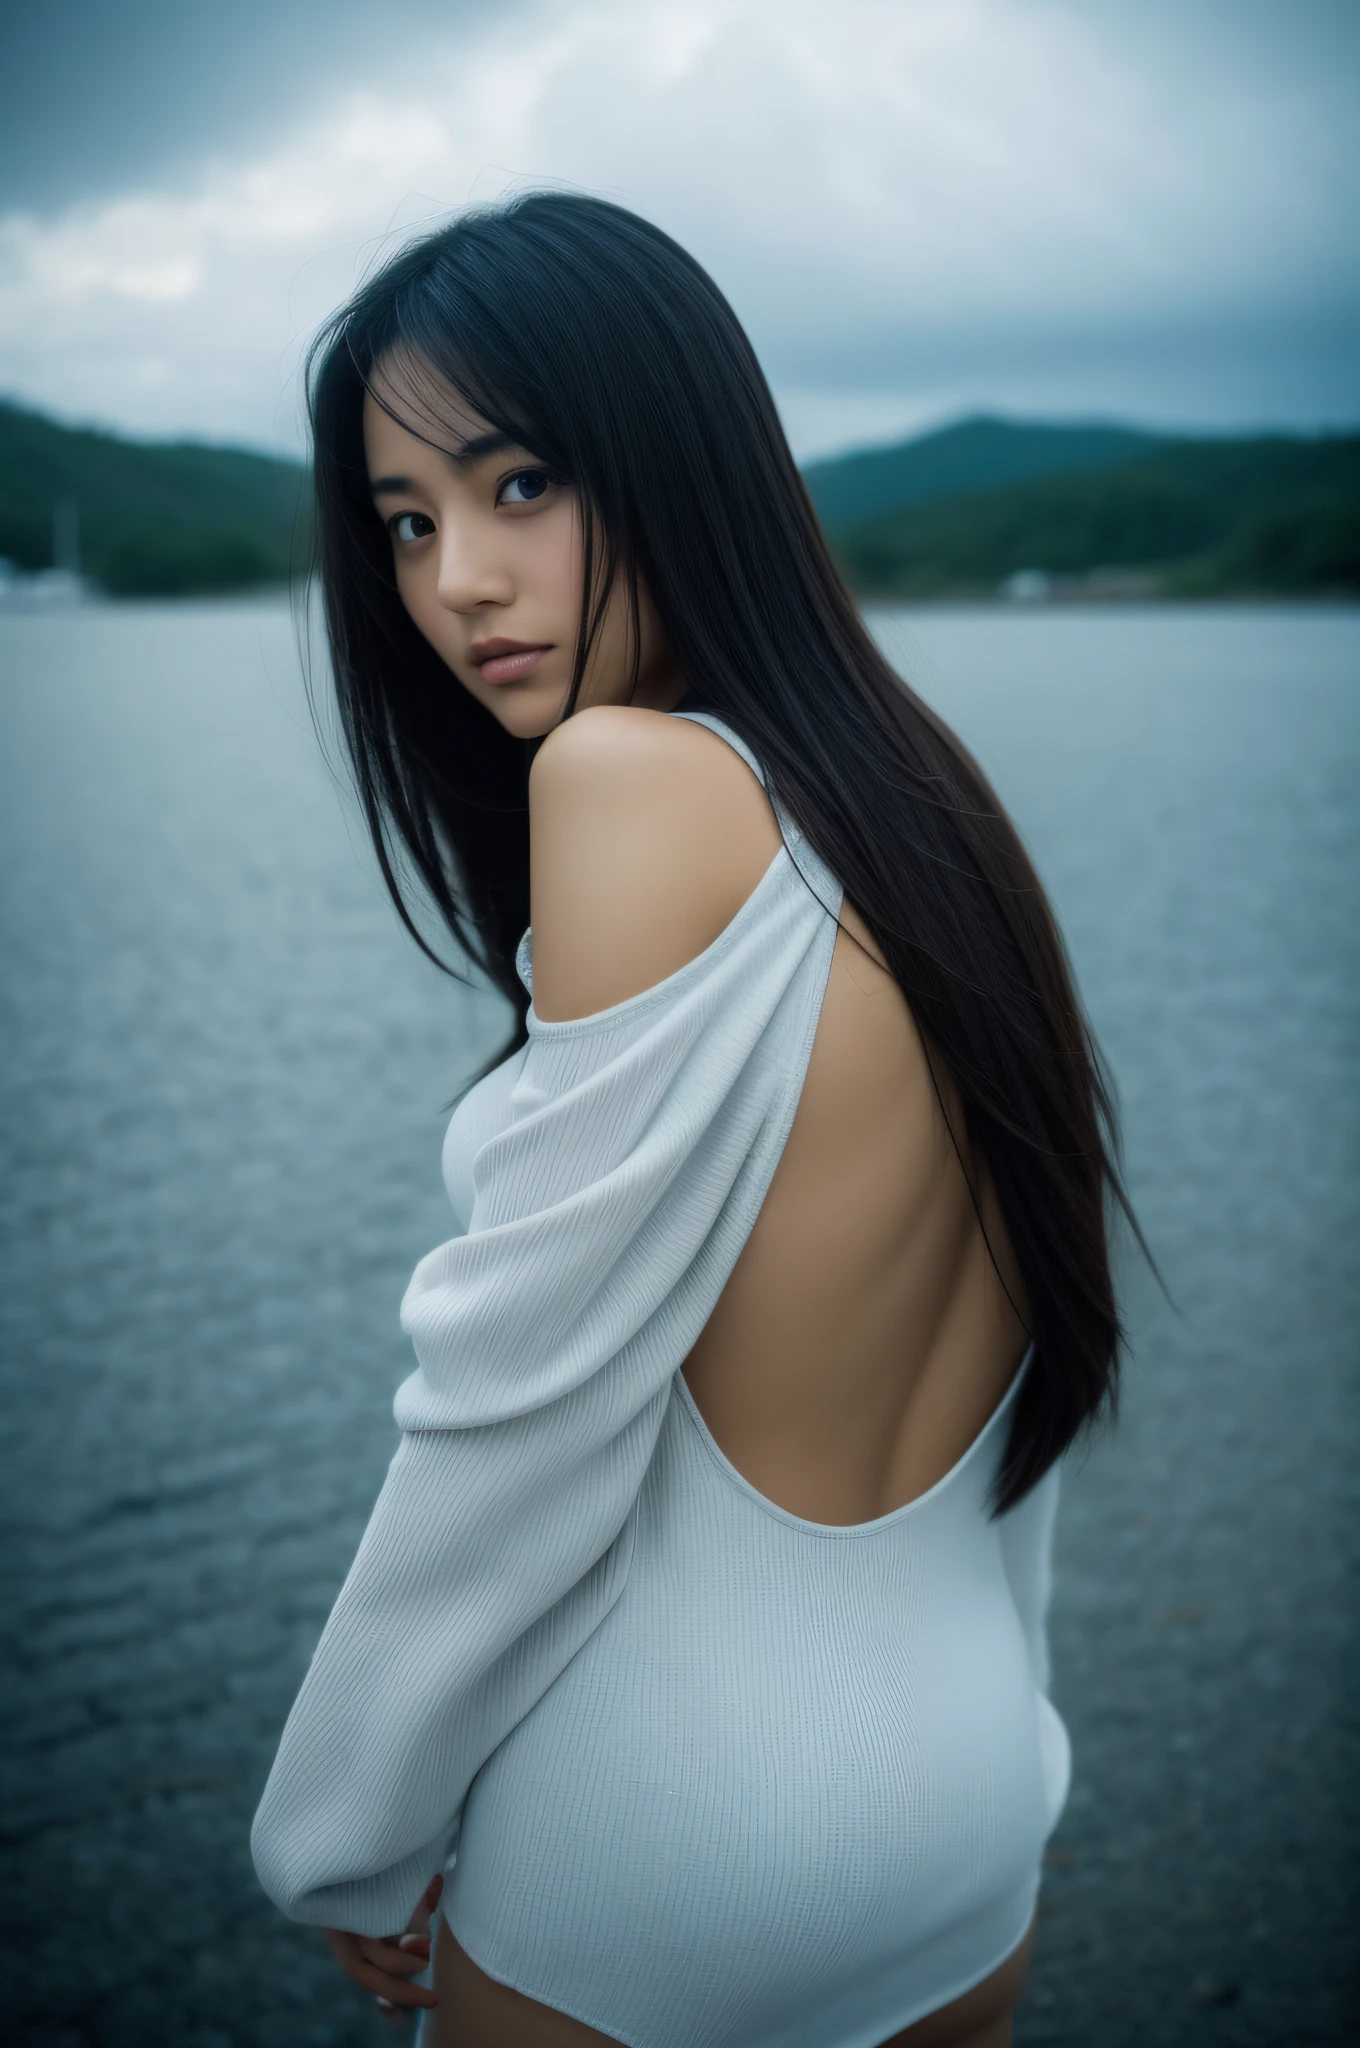 1girl in,Very beautiful 30 year old Japan woman、beautidful eyes、cleavage of the breast、the wind、cloudy ash sky、It's raining a little、Body like a model、The shirt、T back、open one's legs、high-level image quality、Top image quality、Looking at the camera、Focus on the eyes、Waterfront、Norinobu Shinoyama